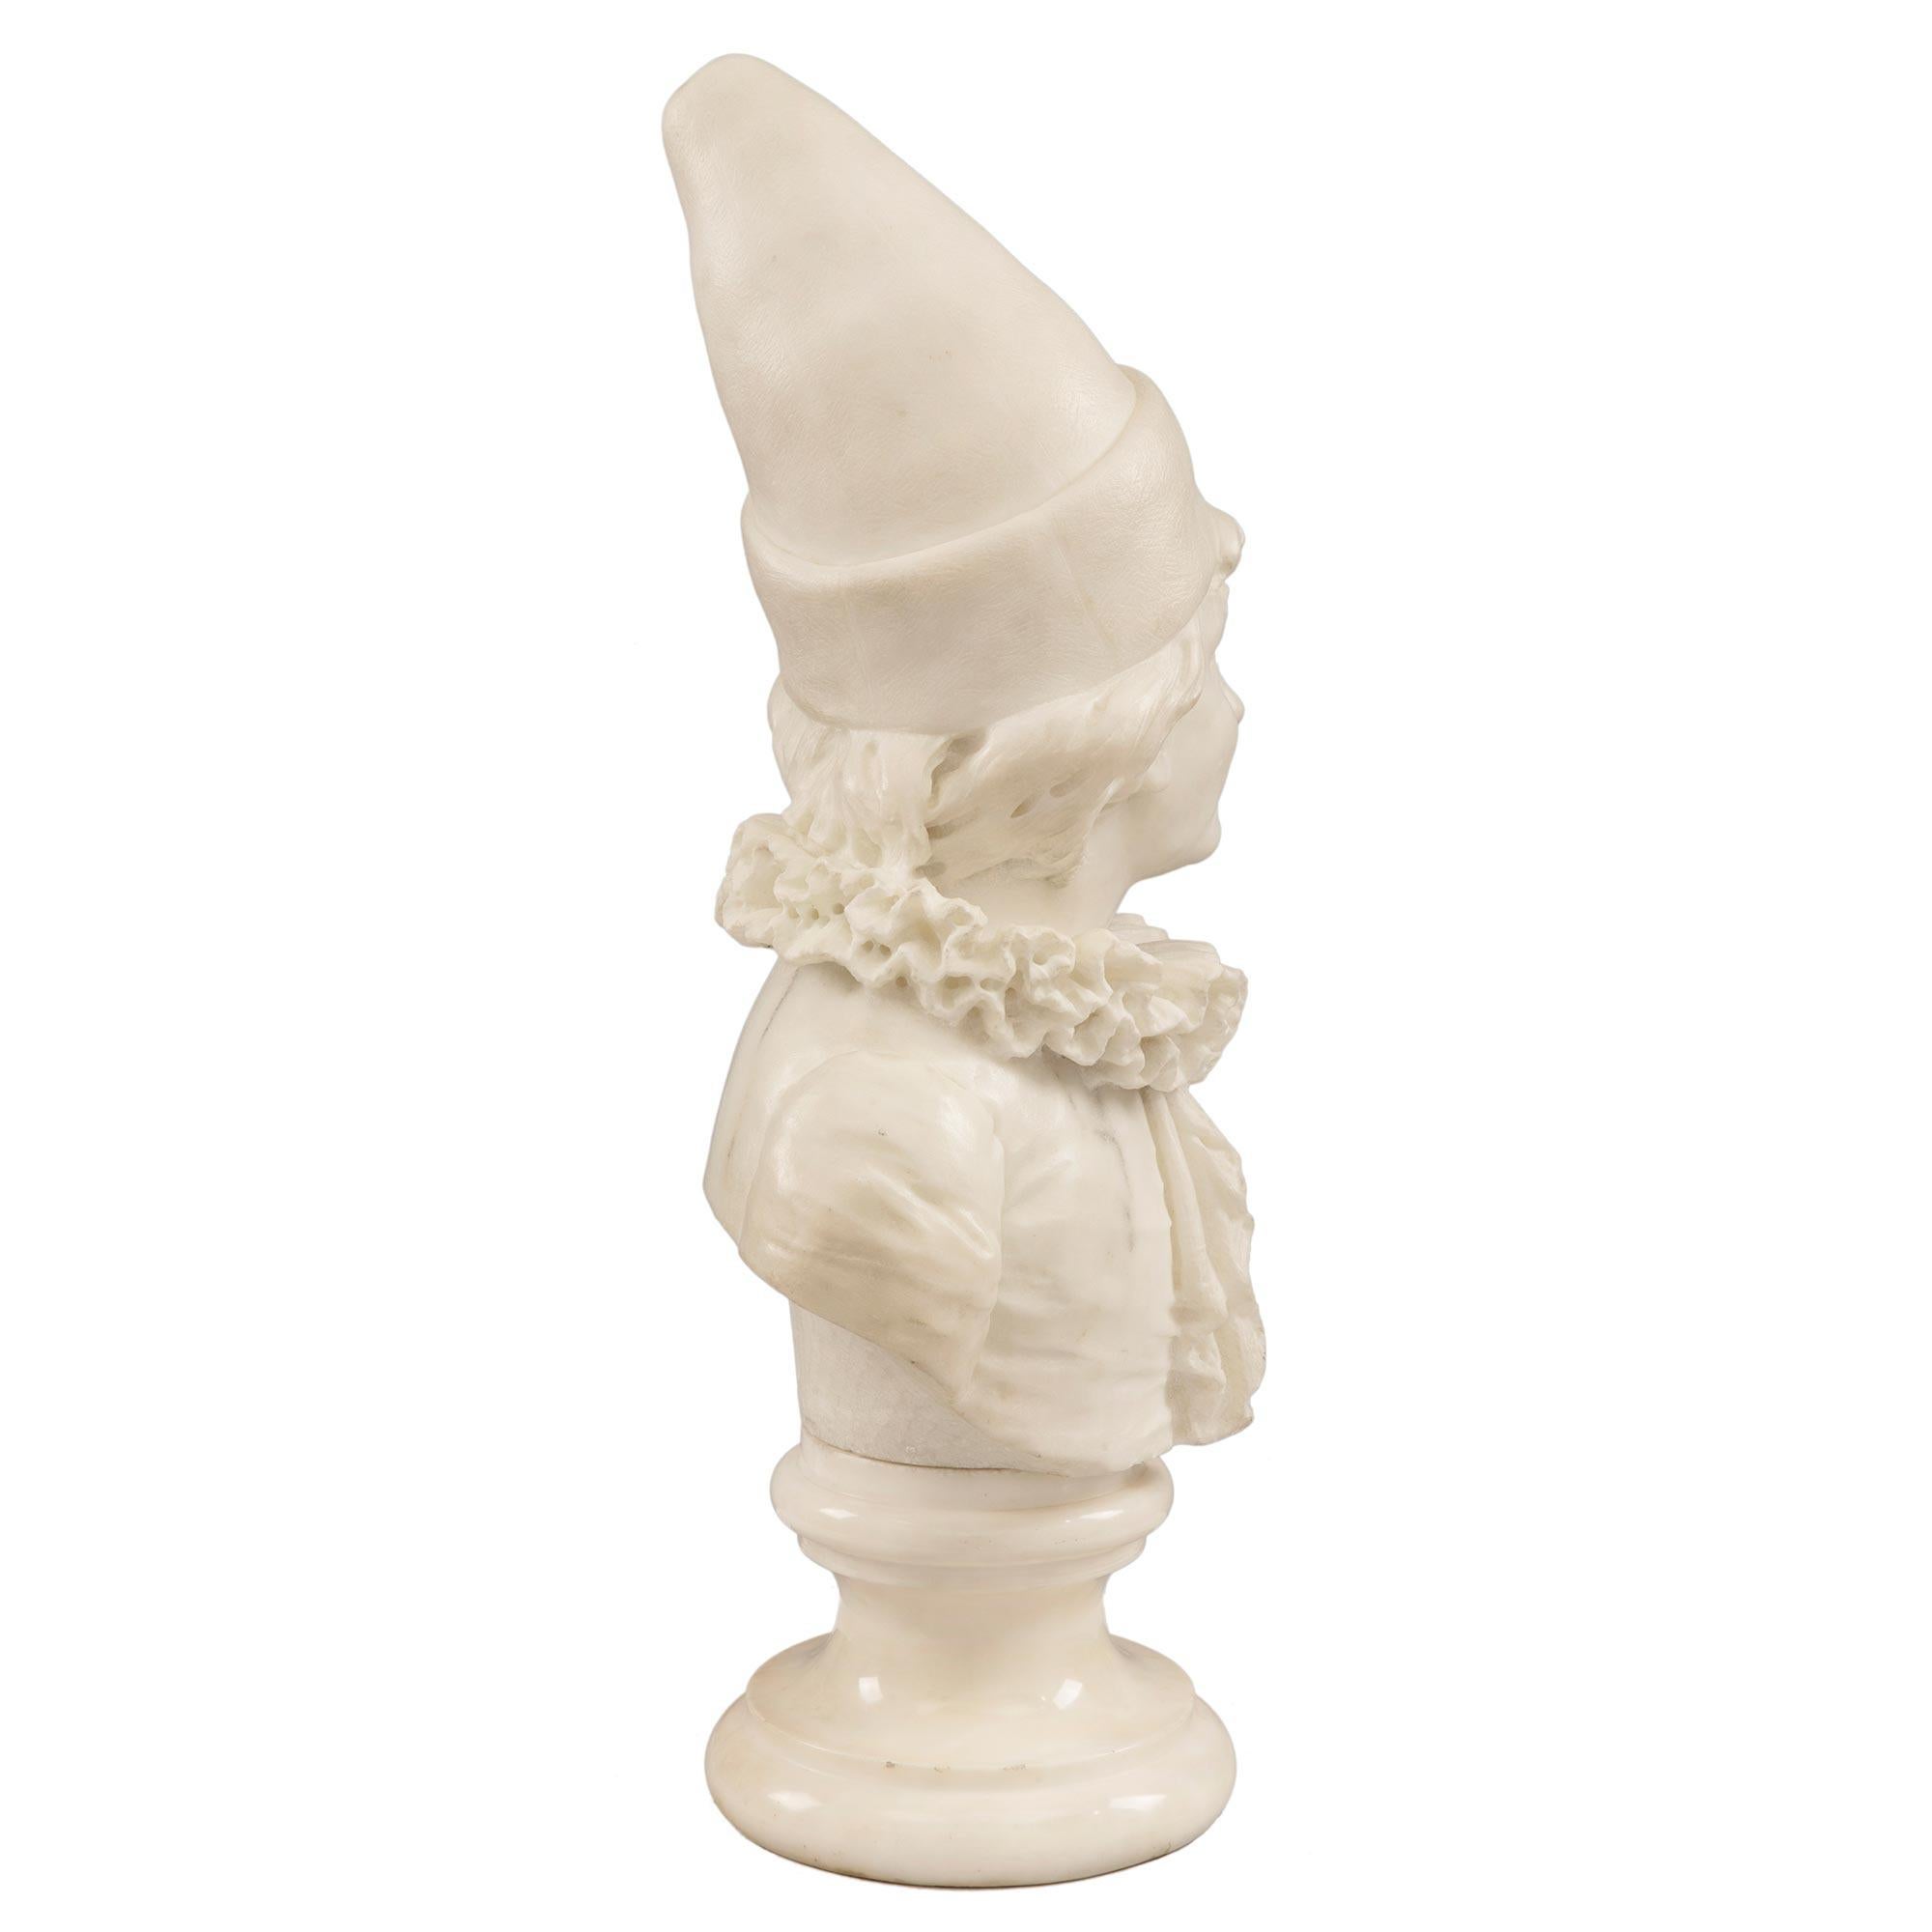 A charming and well executed Italian 19th century White Carrara marble signed bust of Pierrot. The young Pierrot is raised by its original circular mottled socle base. Pierrot, having a wonderful expression on his face, is wearing a detailed tudor